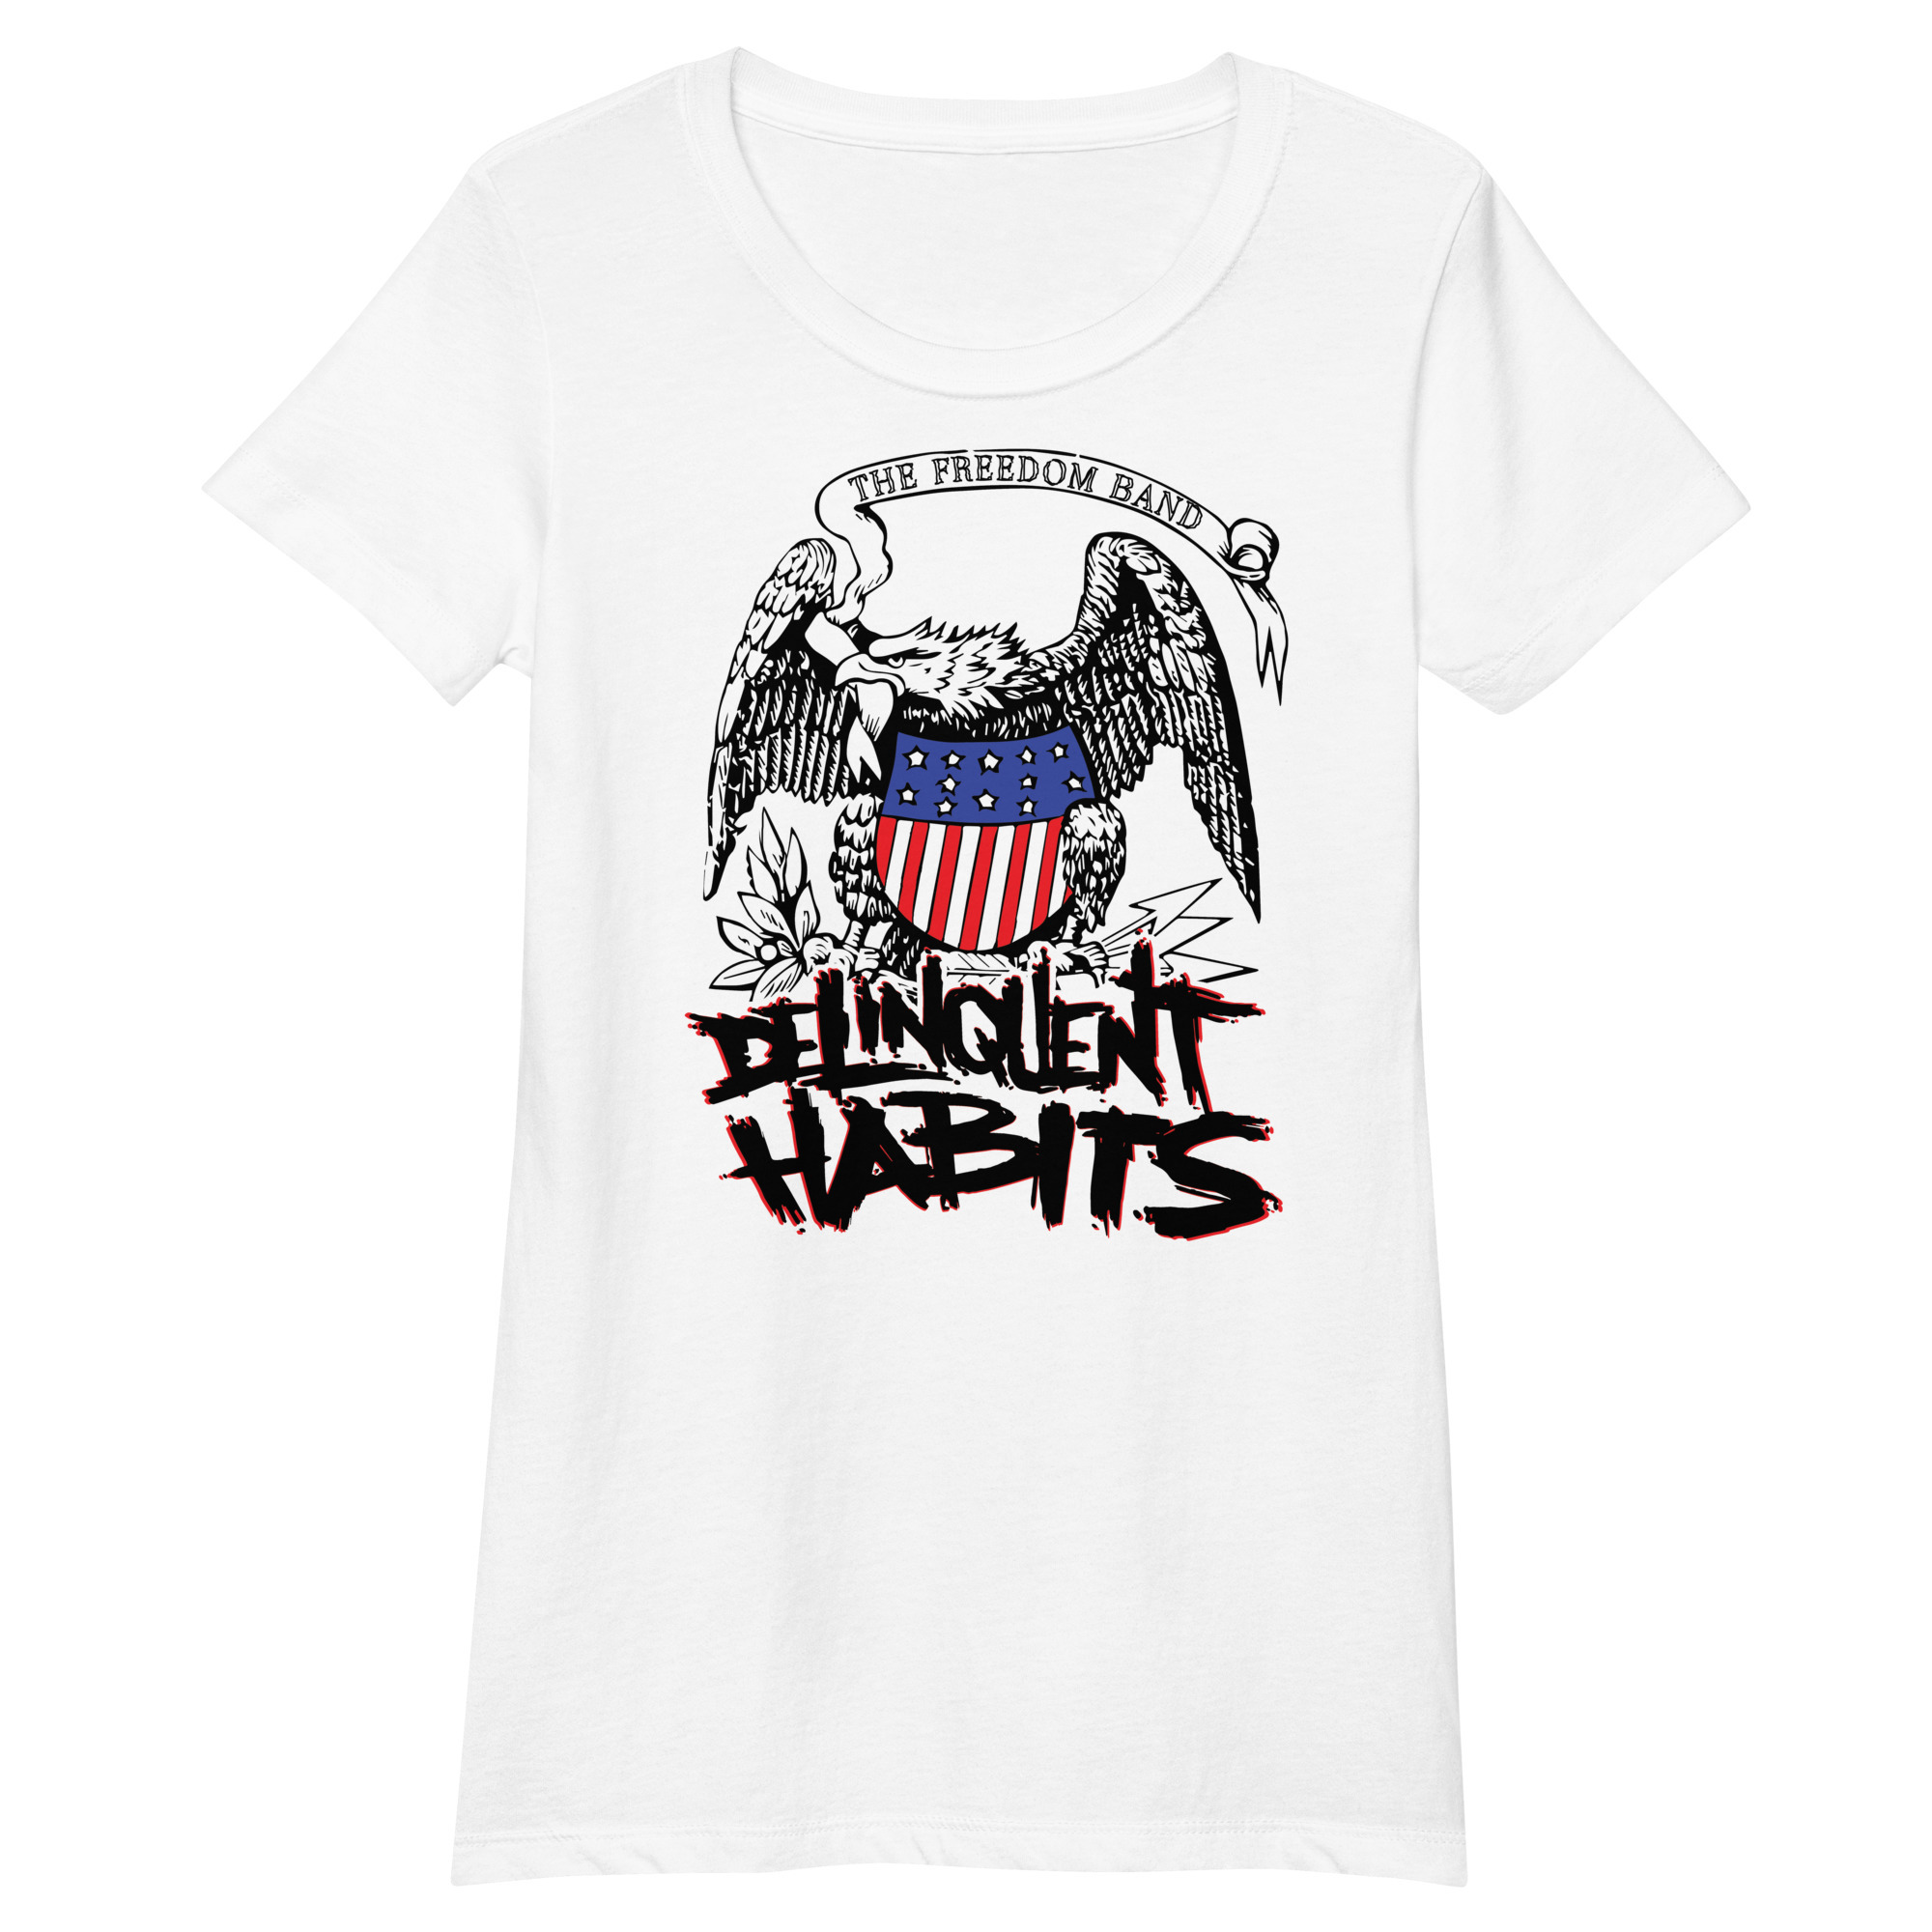 Freedom Band - Women’s fitted t-shirt 00094